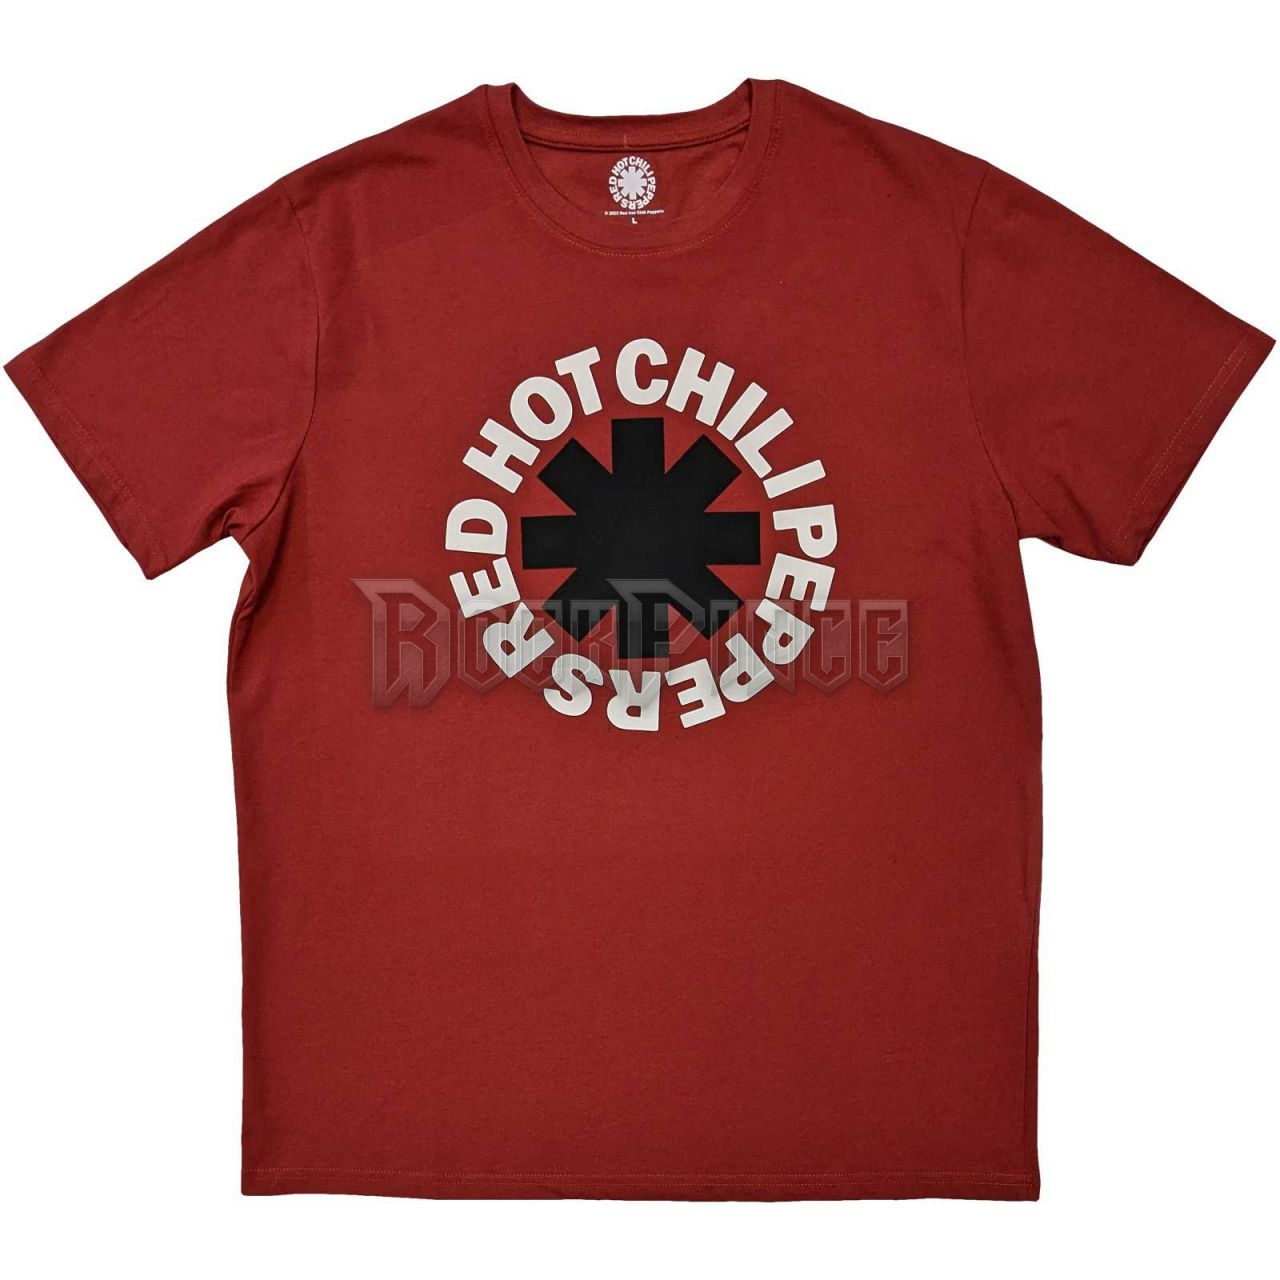 Red Hot Chili Peppers - Classic Asterisk - unisex póló - RHCPTS01MR